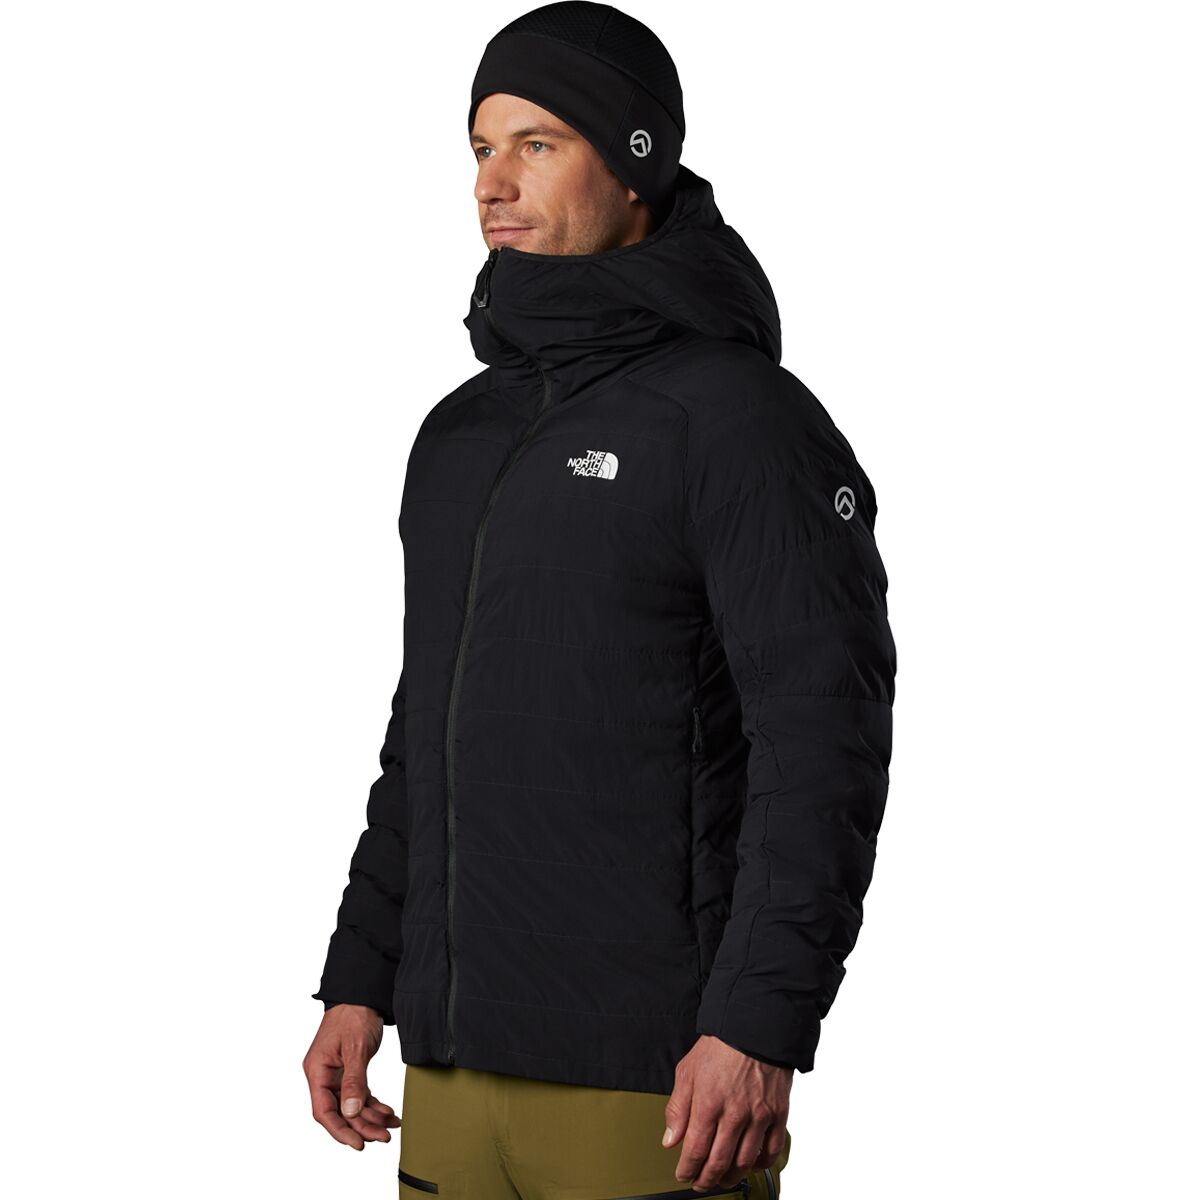 Doudoune The North Face 50/50 Thermoball Homme Noir